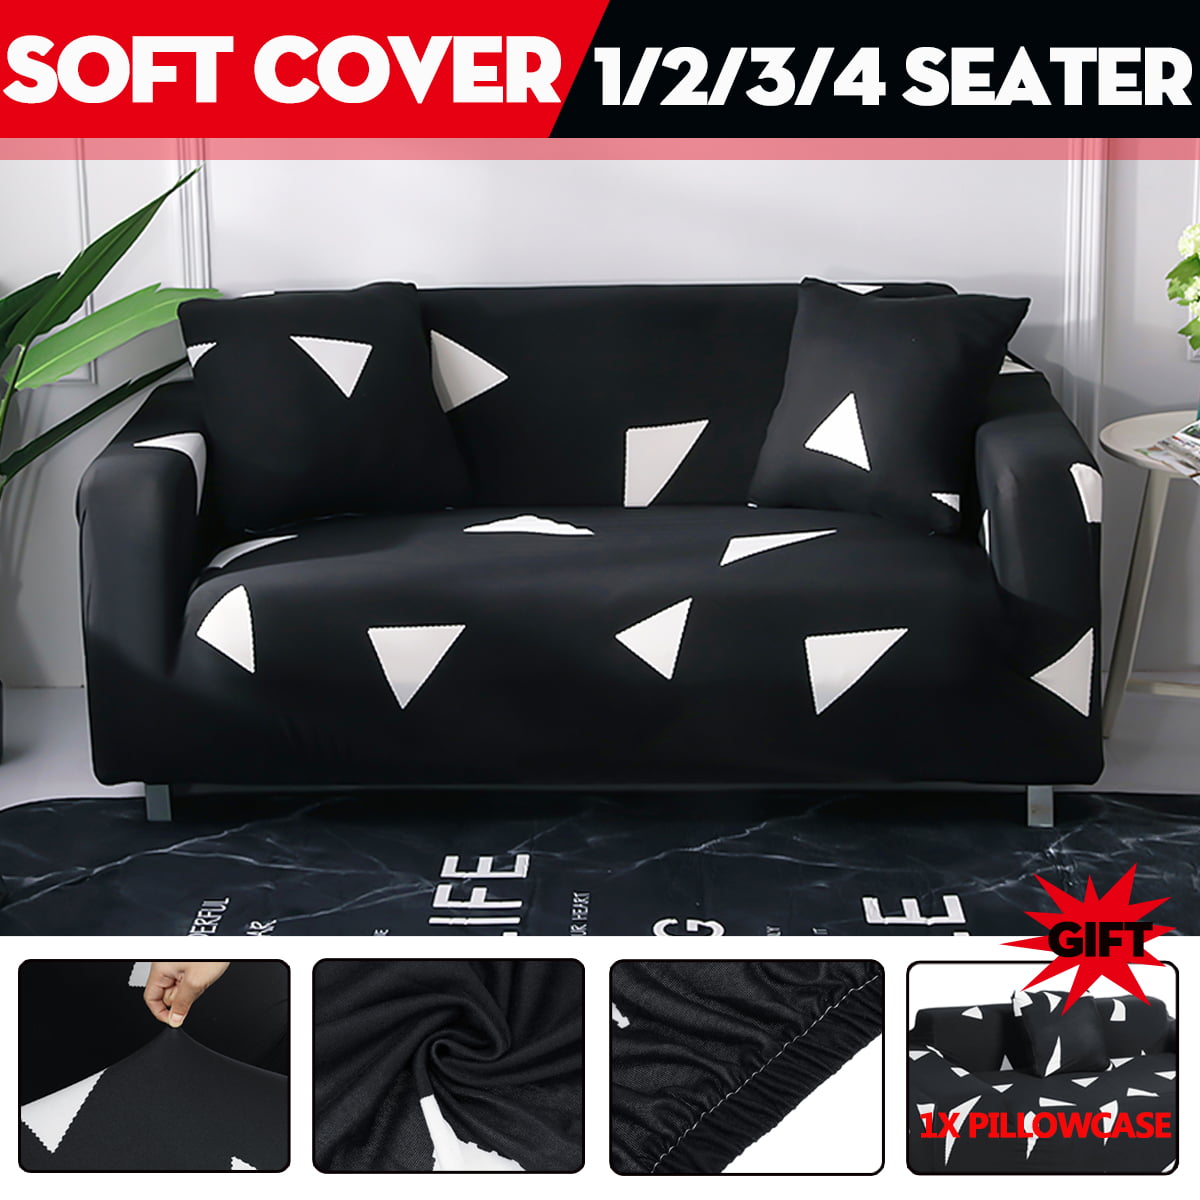 Printed Slipcover Sofa Covers Spandex Stretch Couch Cover Furniture Protector 